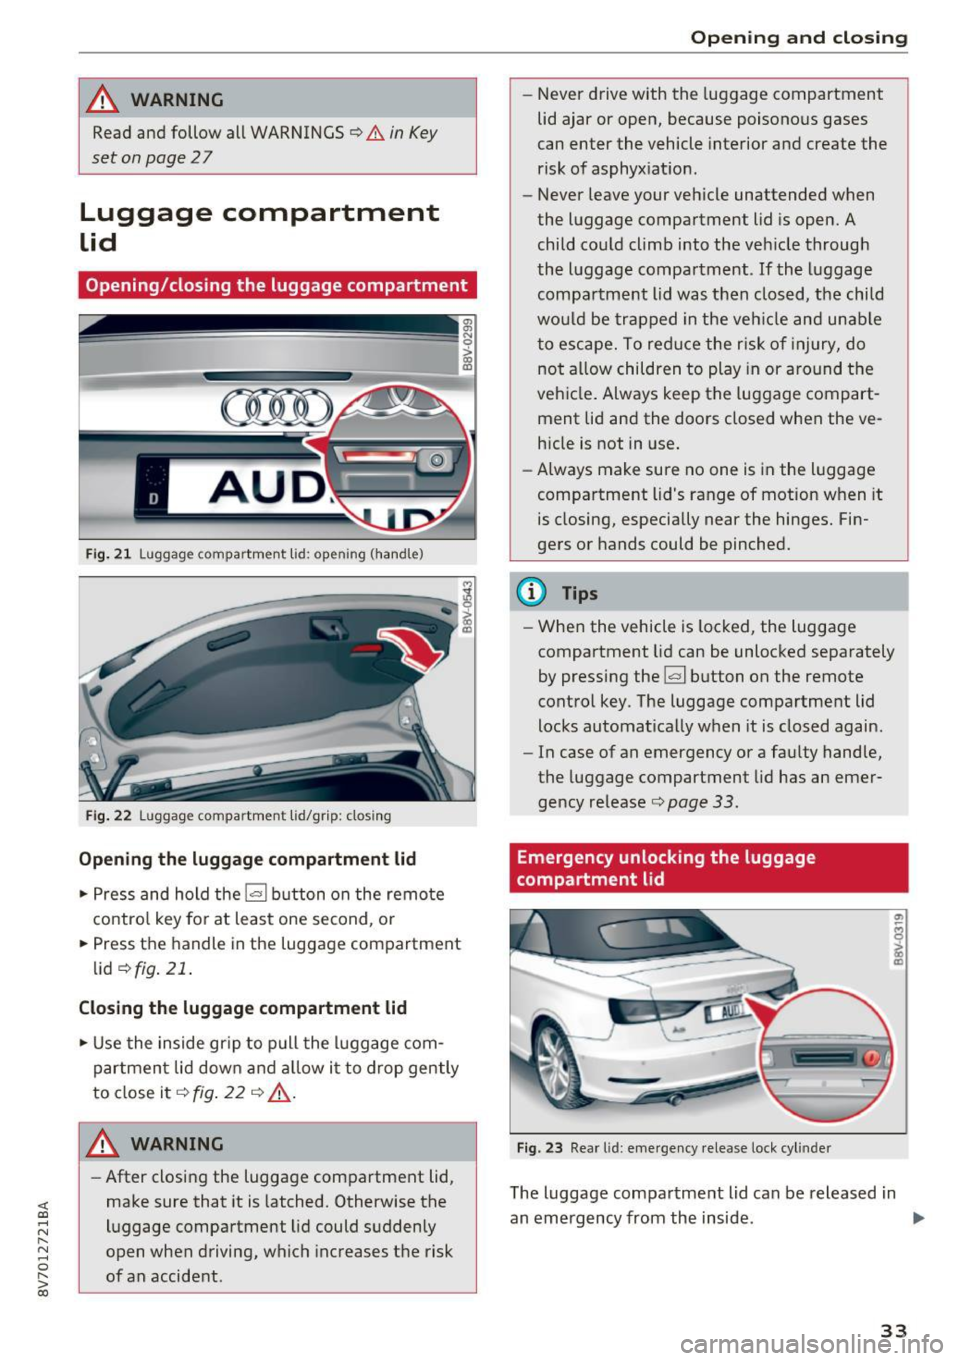 AUDI A3 CABRIOLET 2016  Owners Manual <( co ..... N 
" N ..... 0 
" > 00 
A WARNING 
Read  and  follow  all WARNINGS¢&. in Key 
set  on page 2 7 
Luggage  compartment 
Lid 
Opening/closing  the  luggage  compartment 
Fig . 21 Luggag e  c